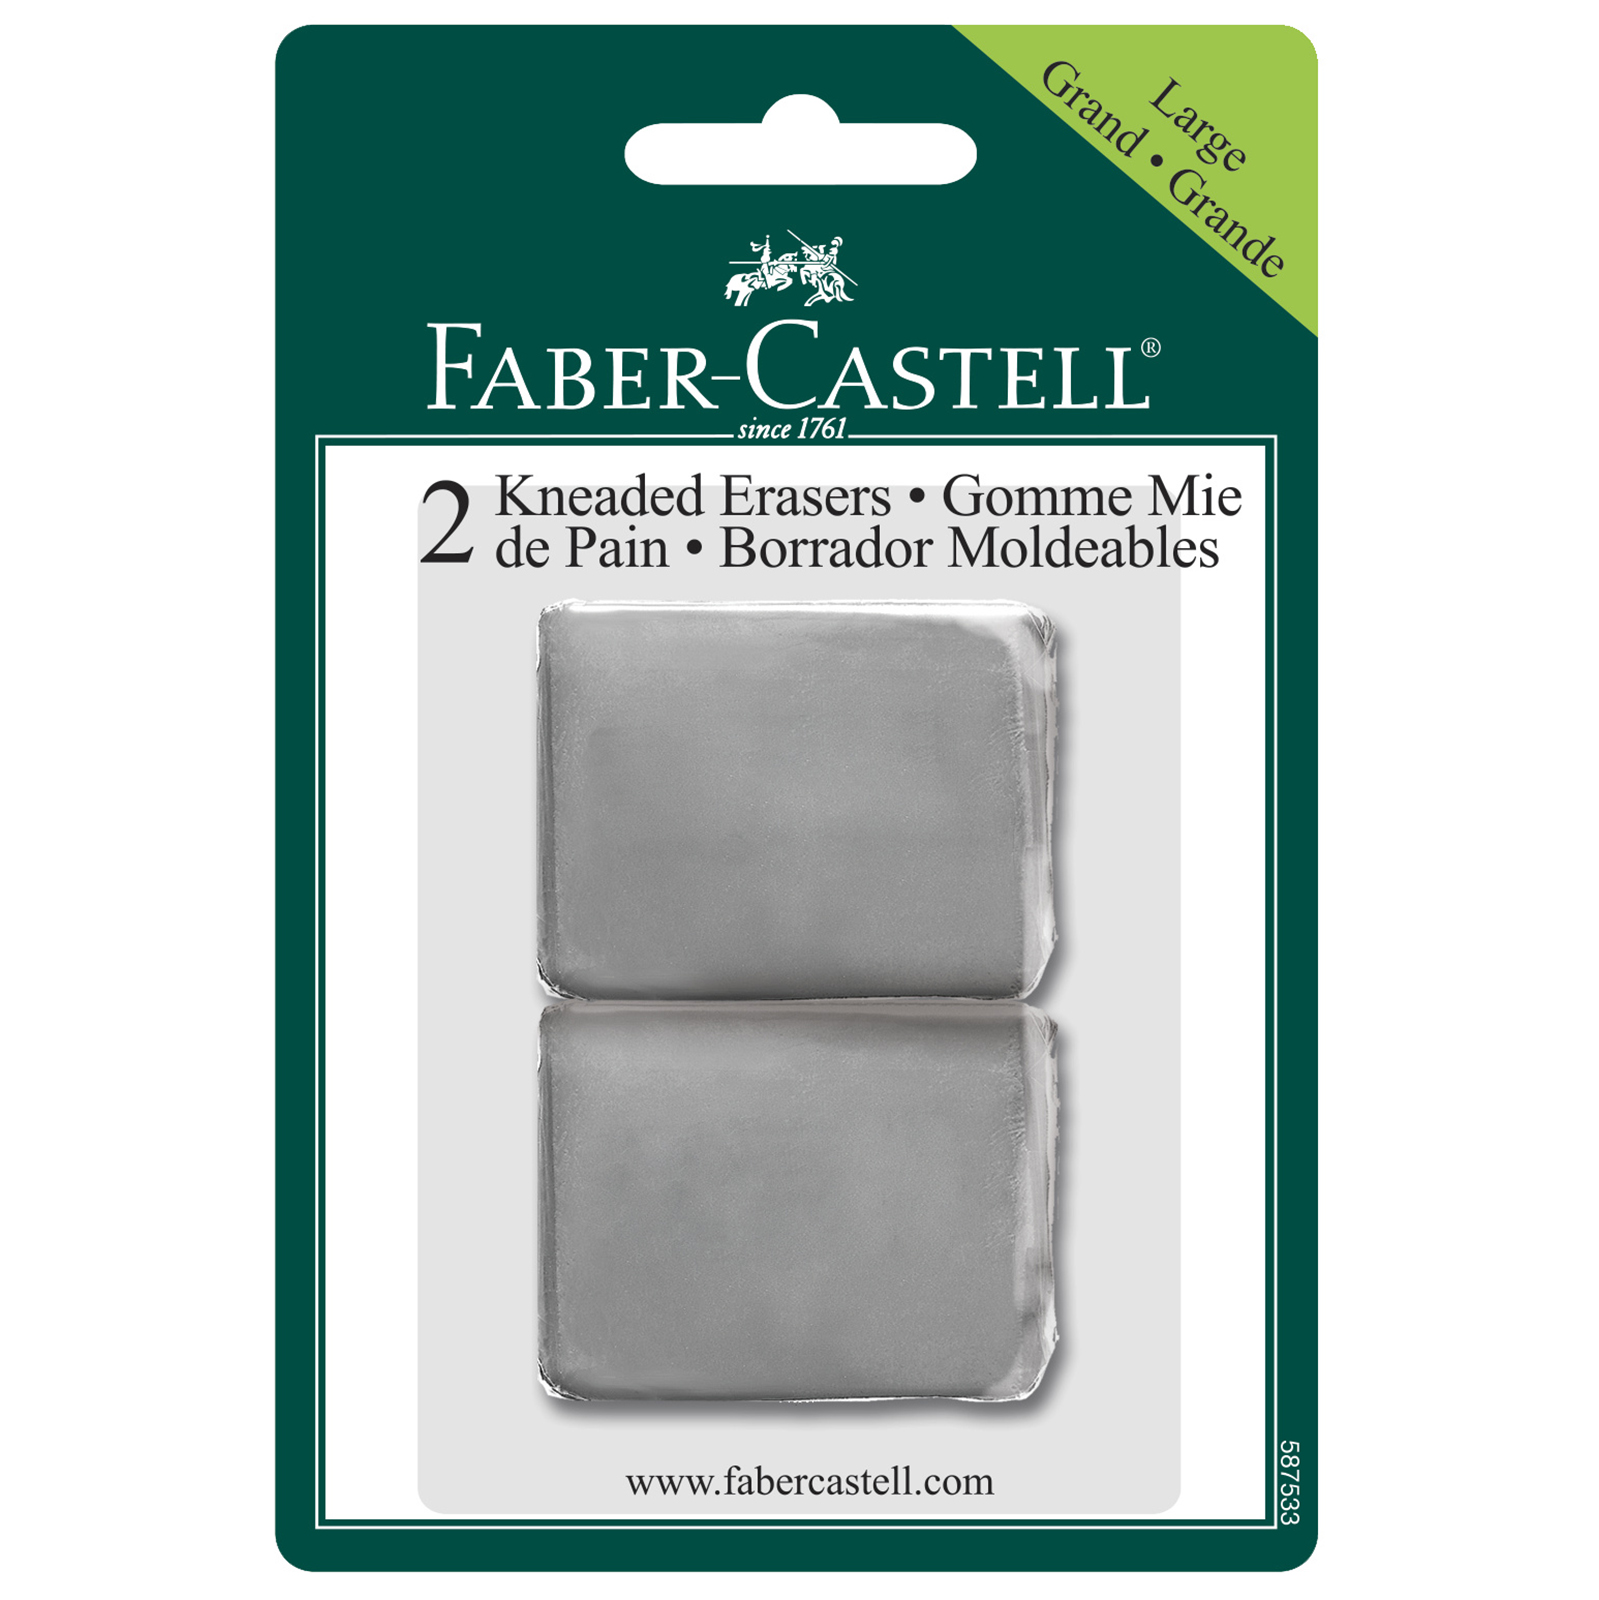 12 Packs: 2 ct. (24 total) Faber-Castell® Kneaded Erasers